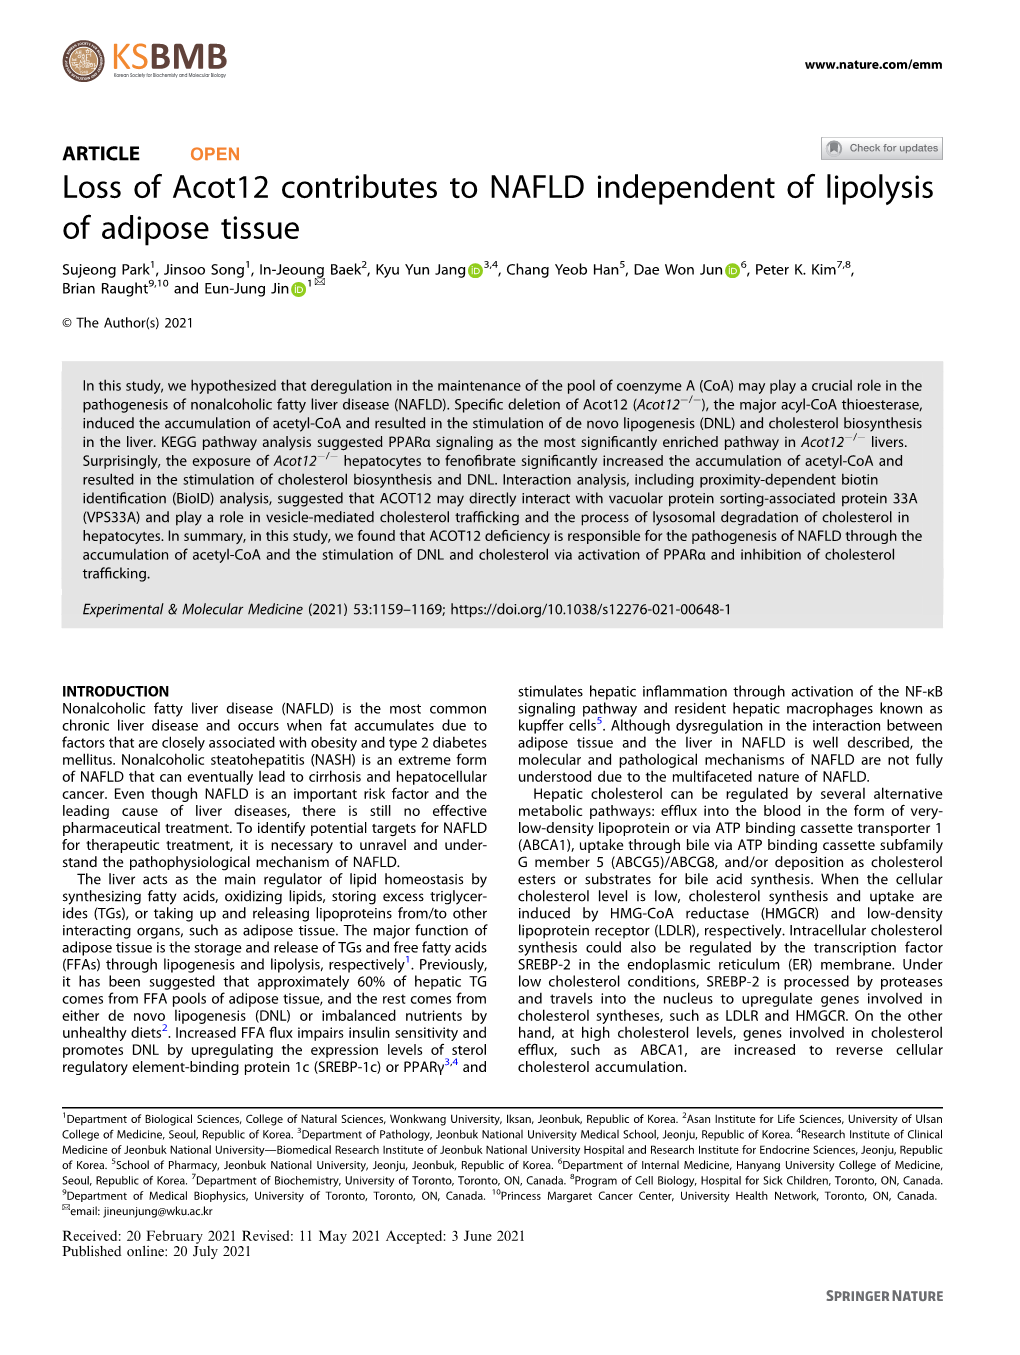 Loss of Acot12 Contributes to NAFLD Independent of Lipolysis of Adipose Tissue